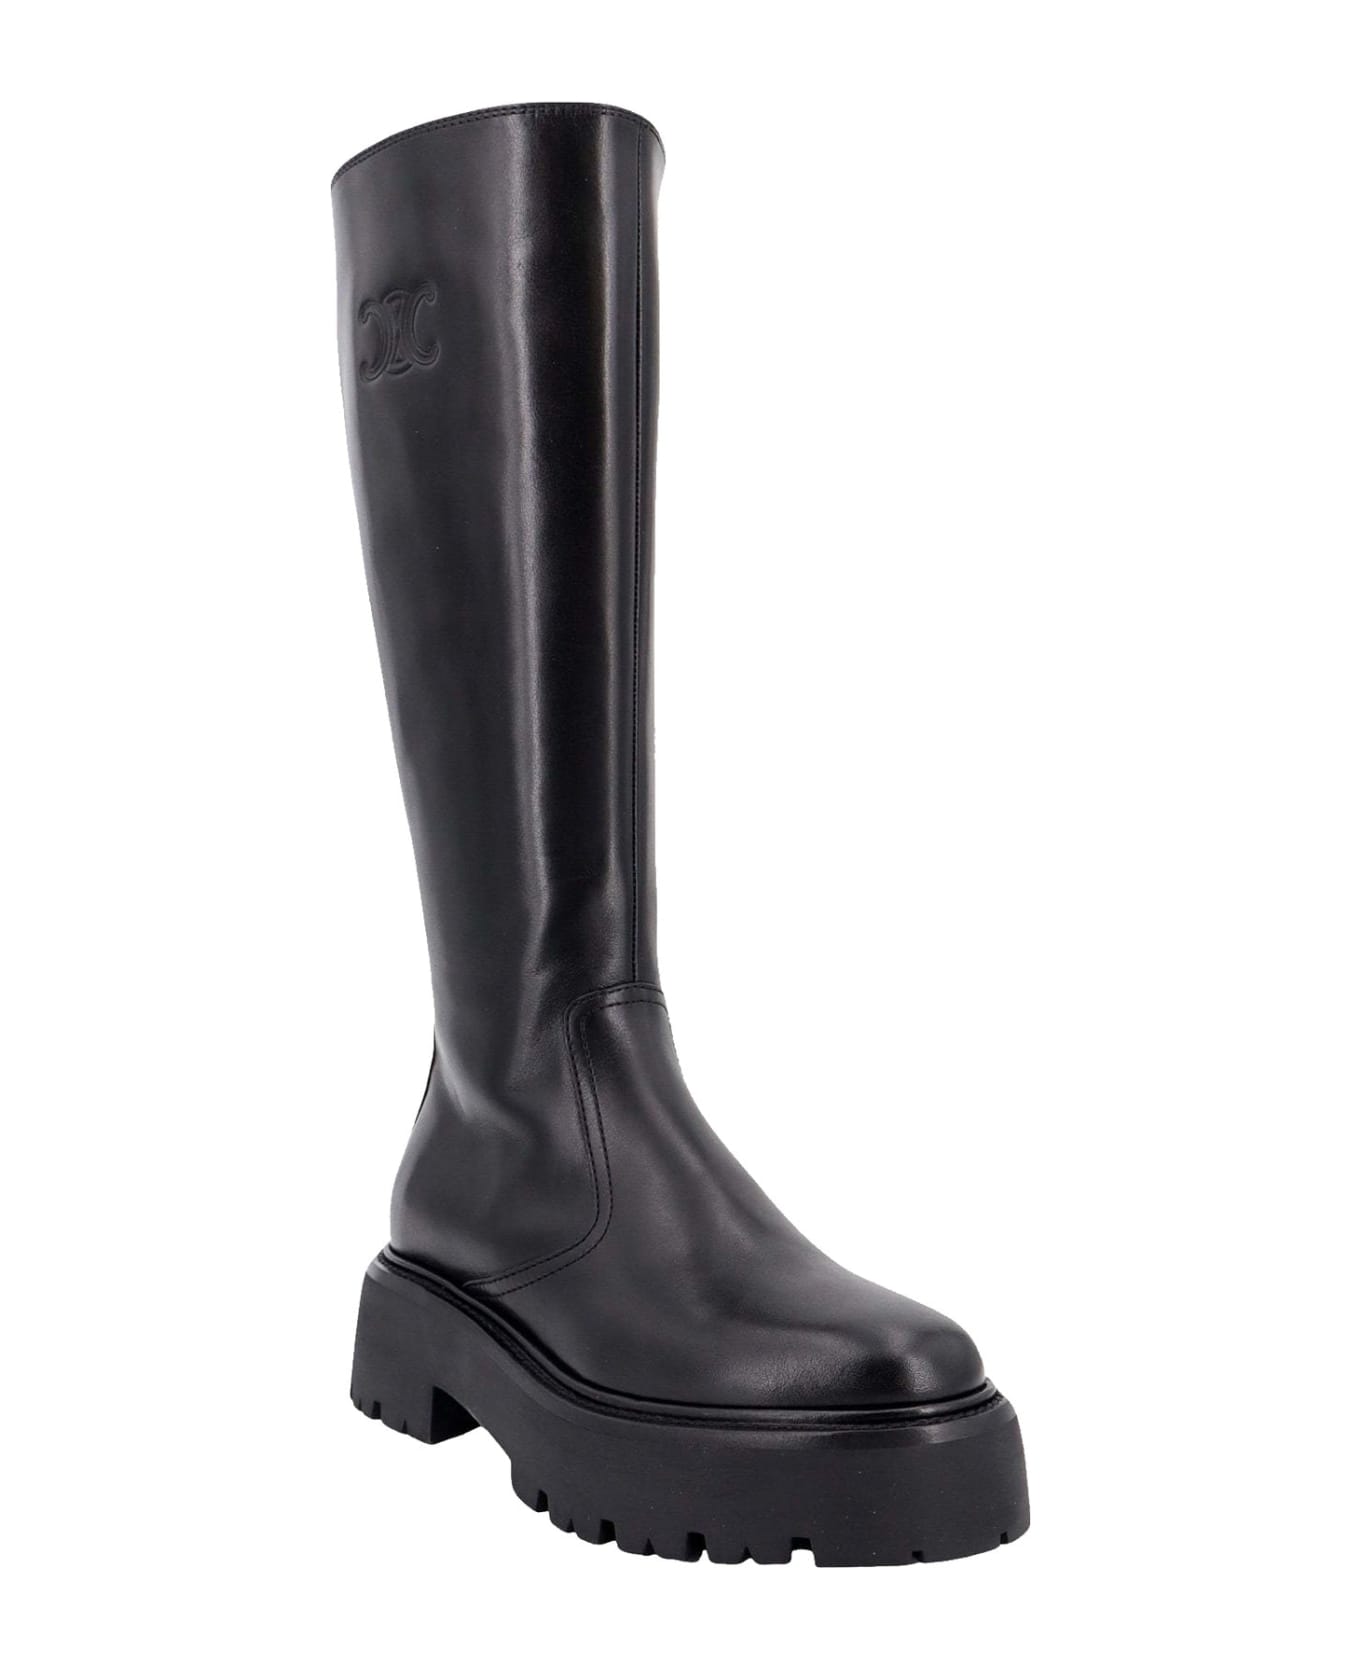 Celine Leather Zipped Boots - Black ブーツ